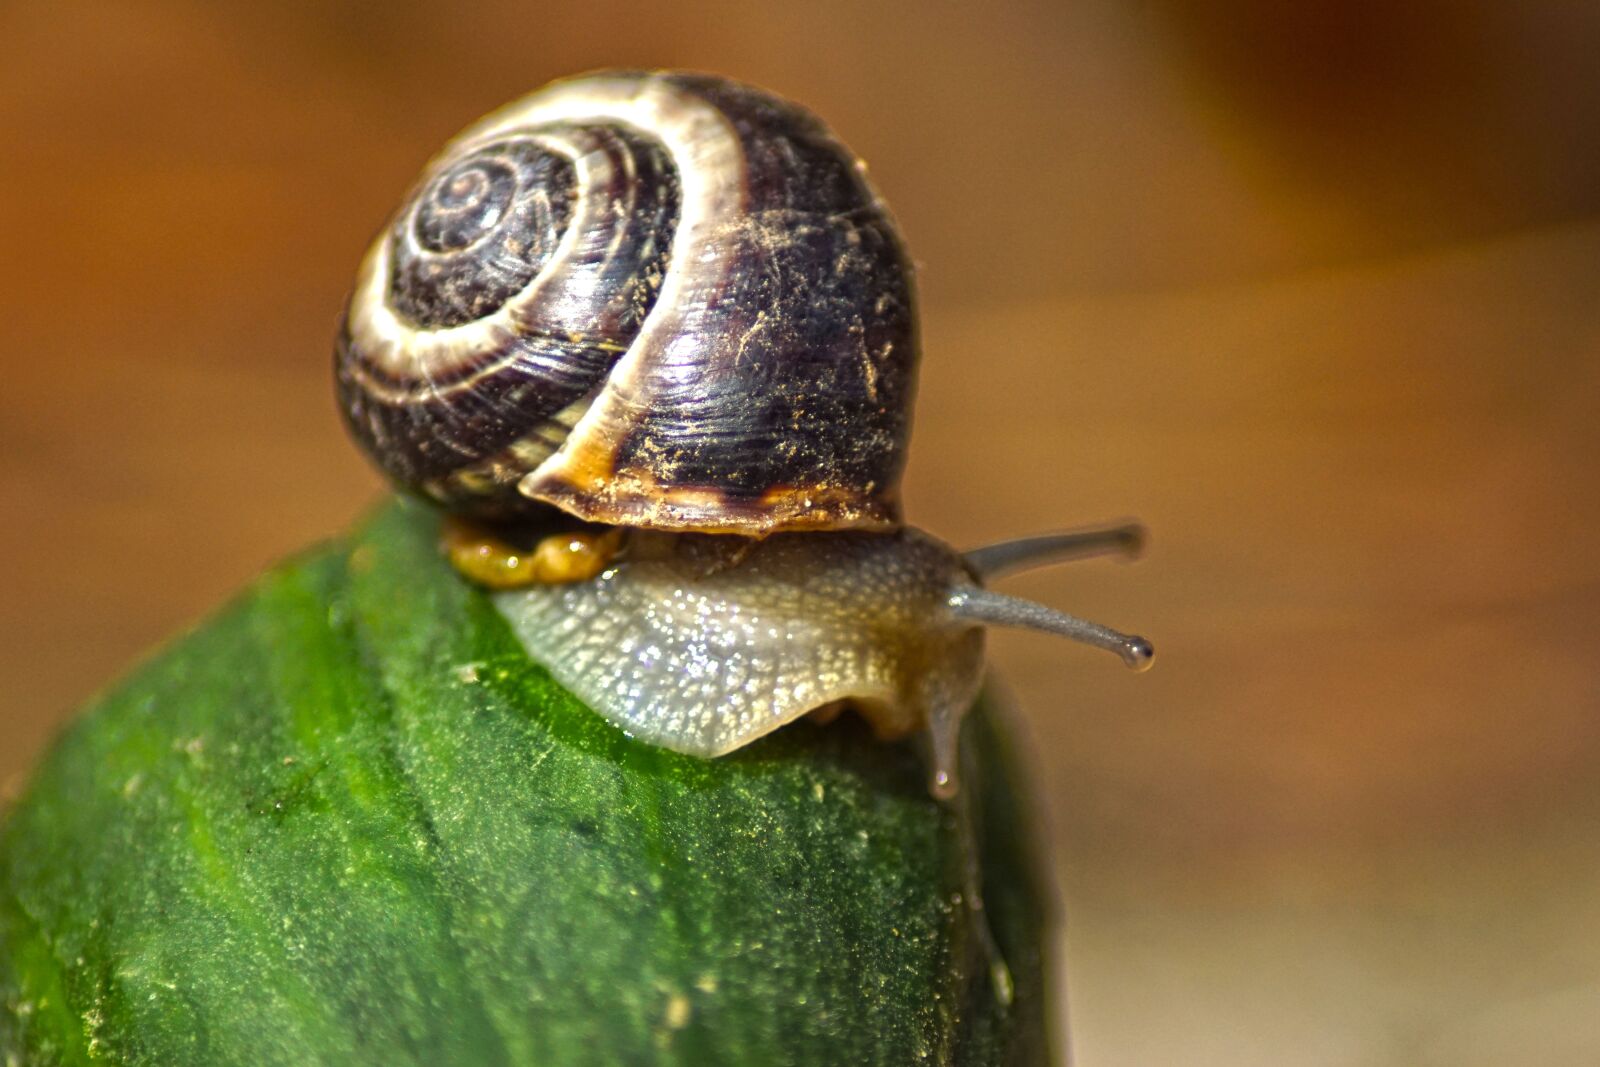 Sony SLT-A68 sample photo. Snail, cucumber, nature photography